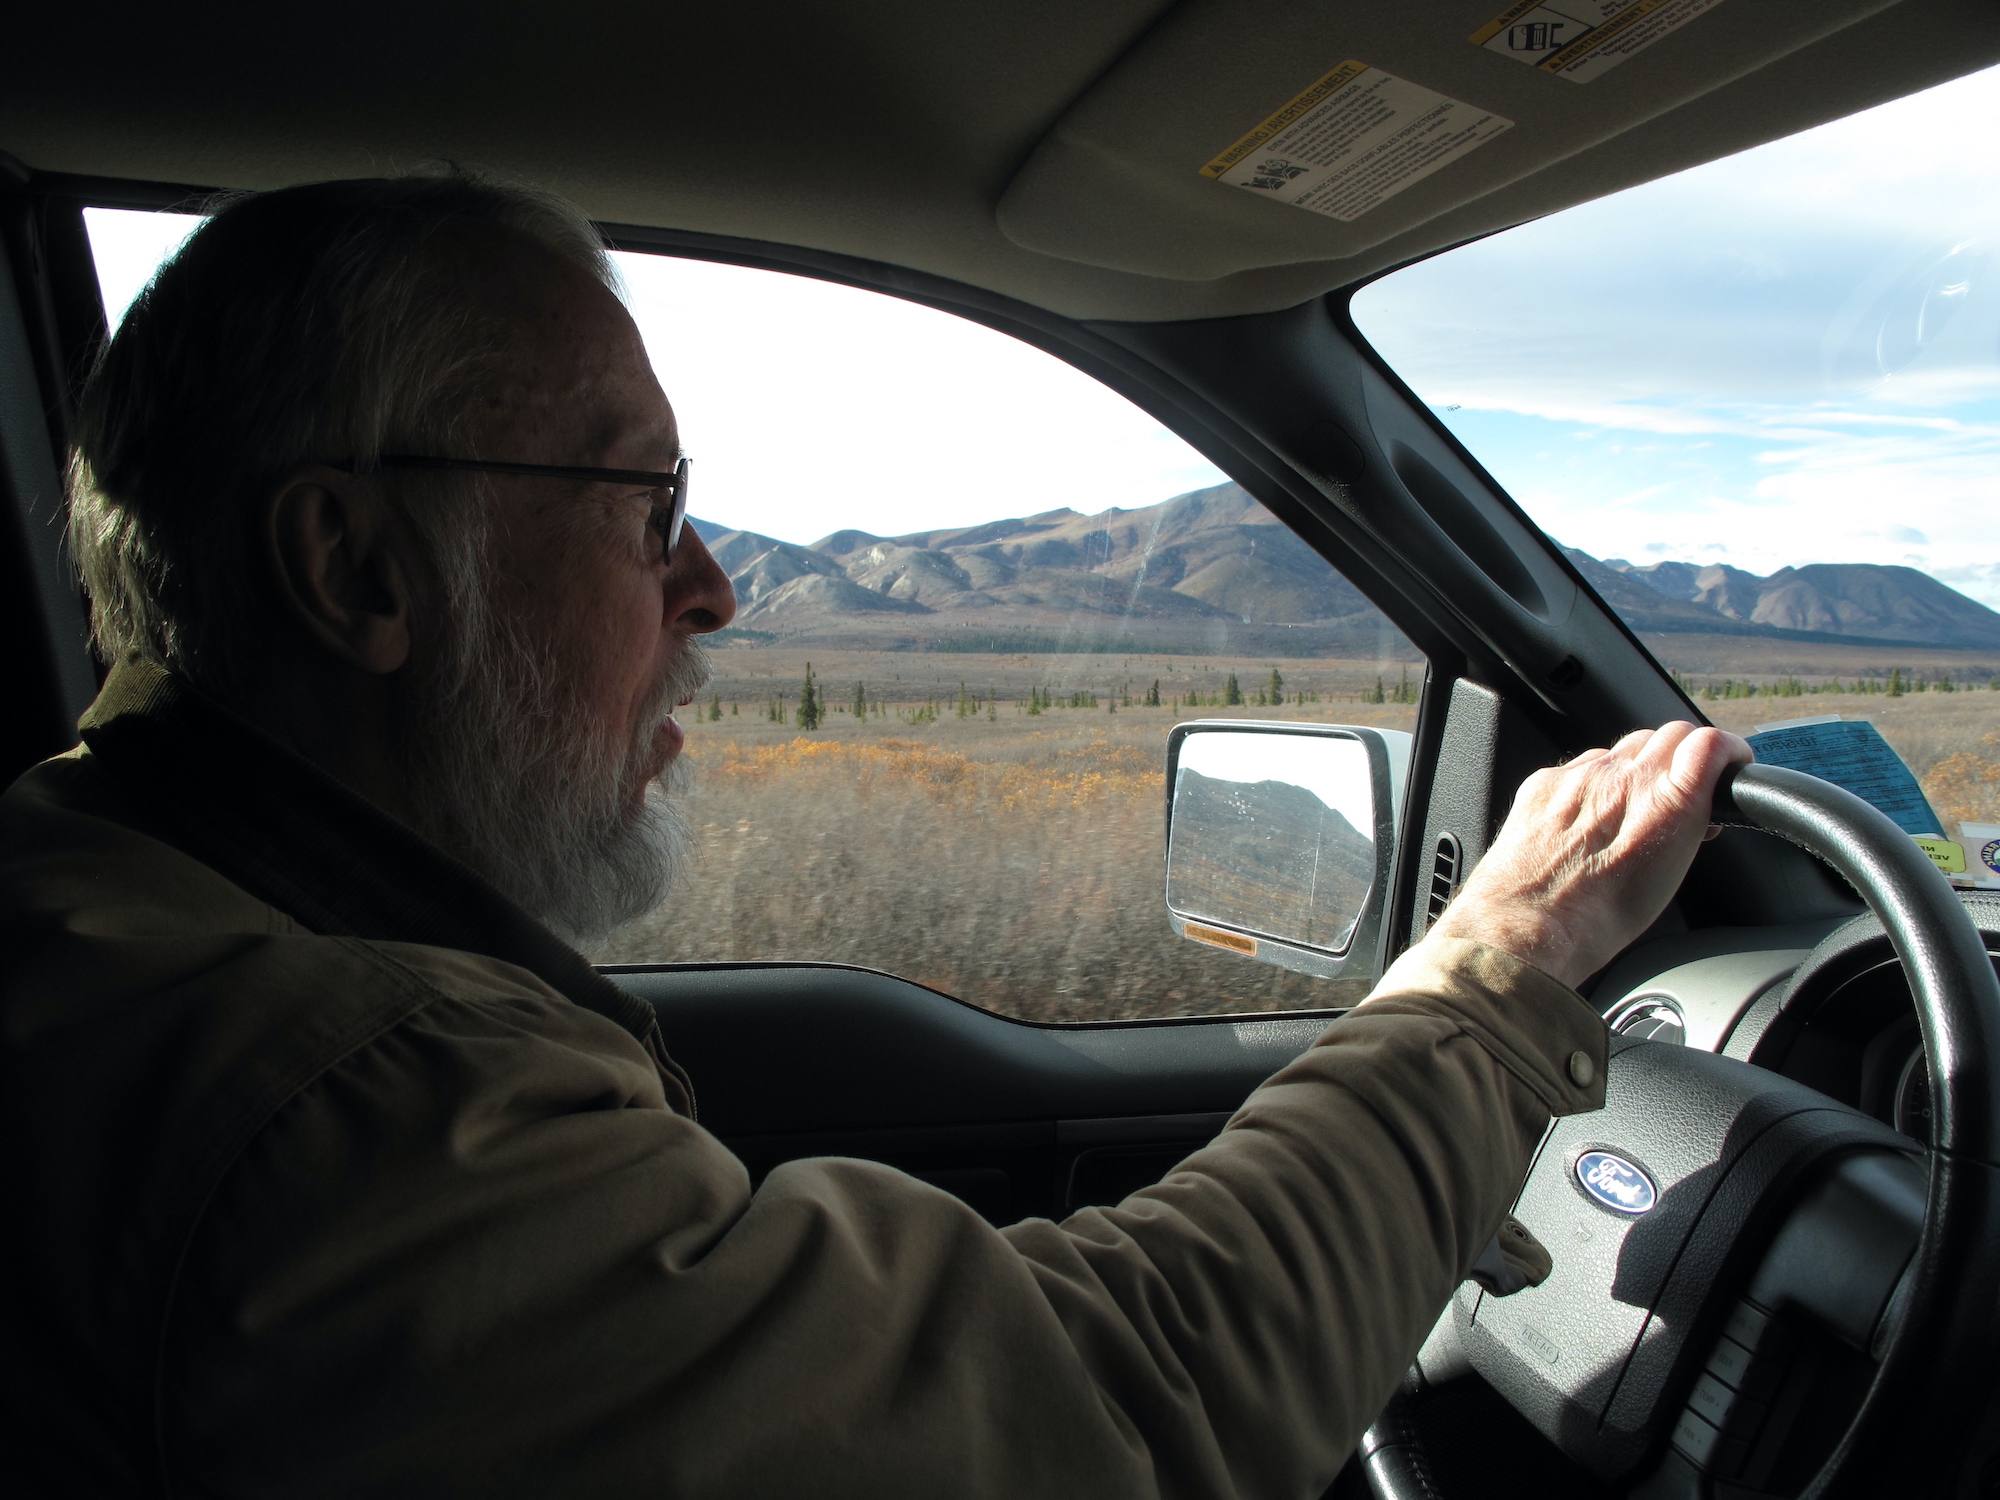 A man with glasses, gray hair and beard drives a vehicle through a fall landscape of tundra and high brush in mountains.